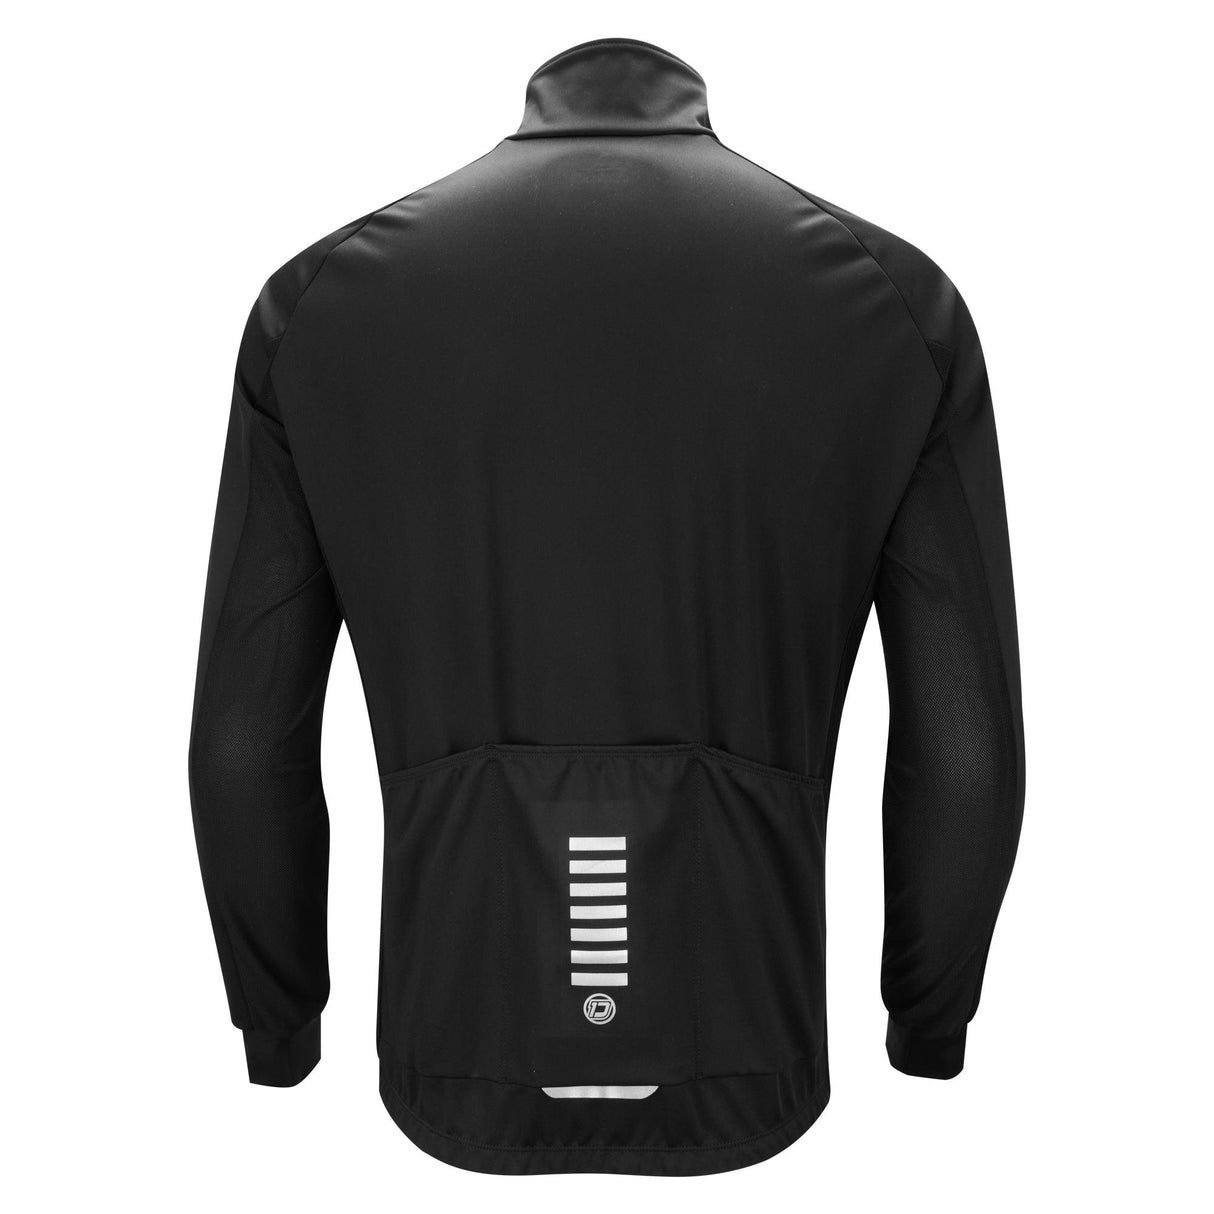 SPECTRAVENTURE THERMAL CYCLING JACKET -BACK- Darevie Shop